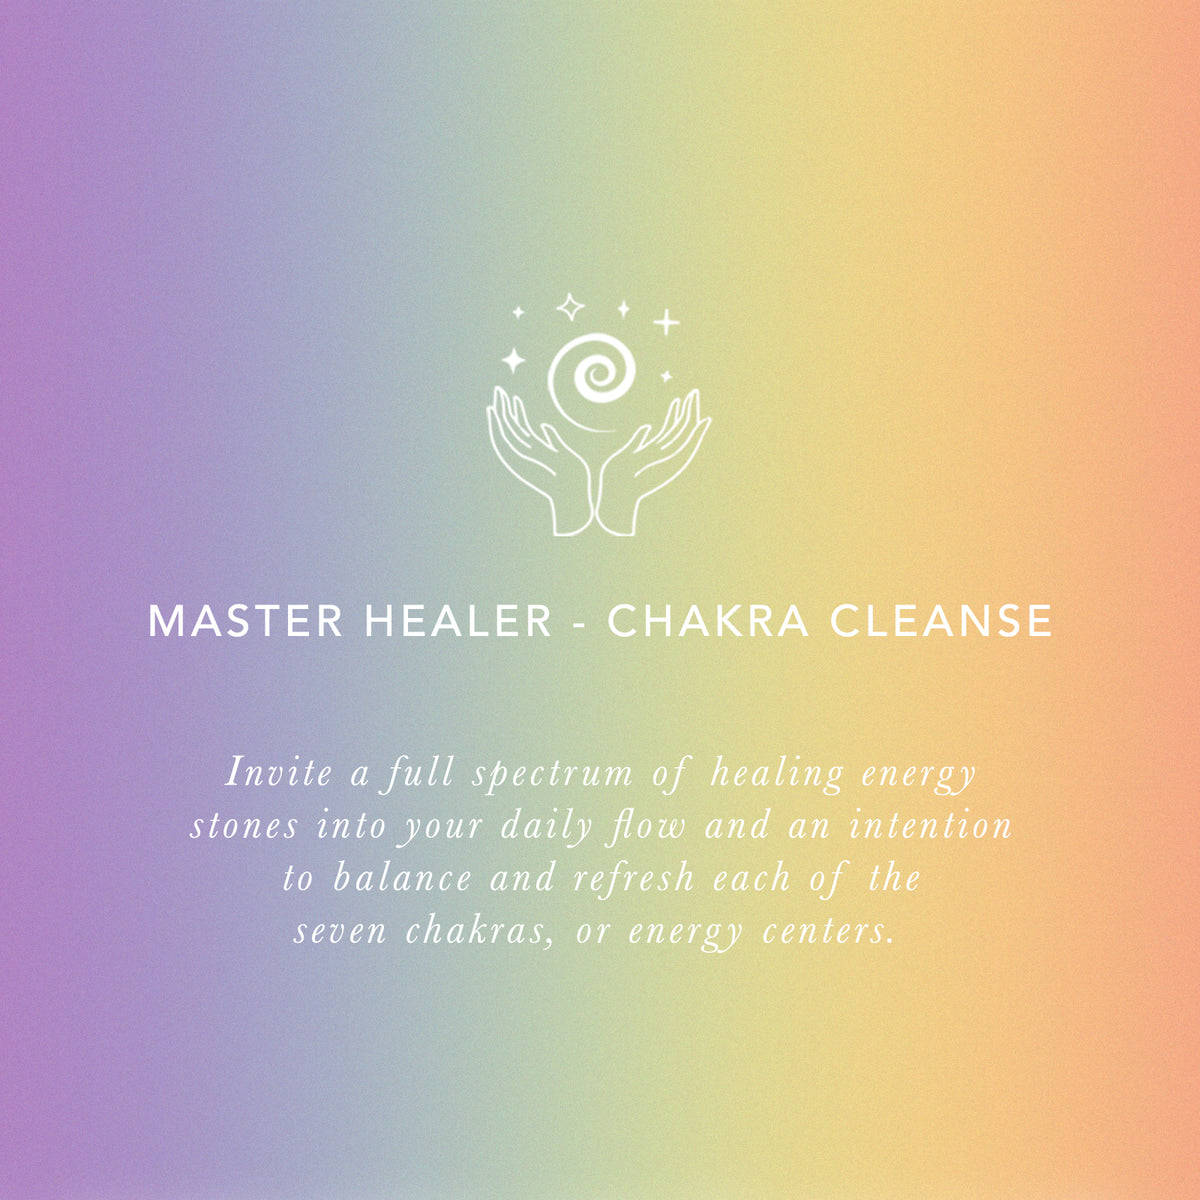 Picture showcases the property of the master healer which is a chakra cleanse. The photo says &quot;Invite a full spectrum of healing energy stones into your daily flow and an intention to balance and refresh each of the seven chakras, or energy centers.